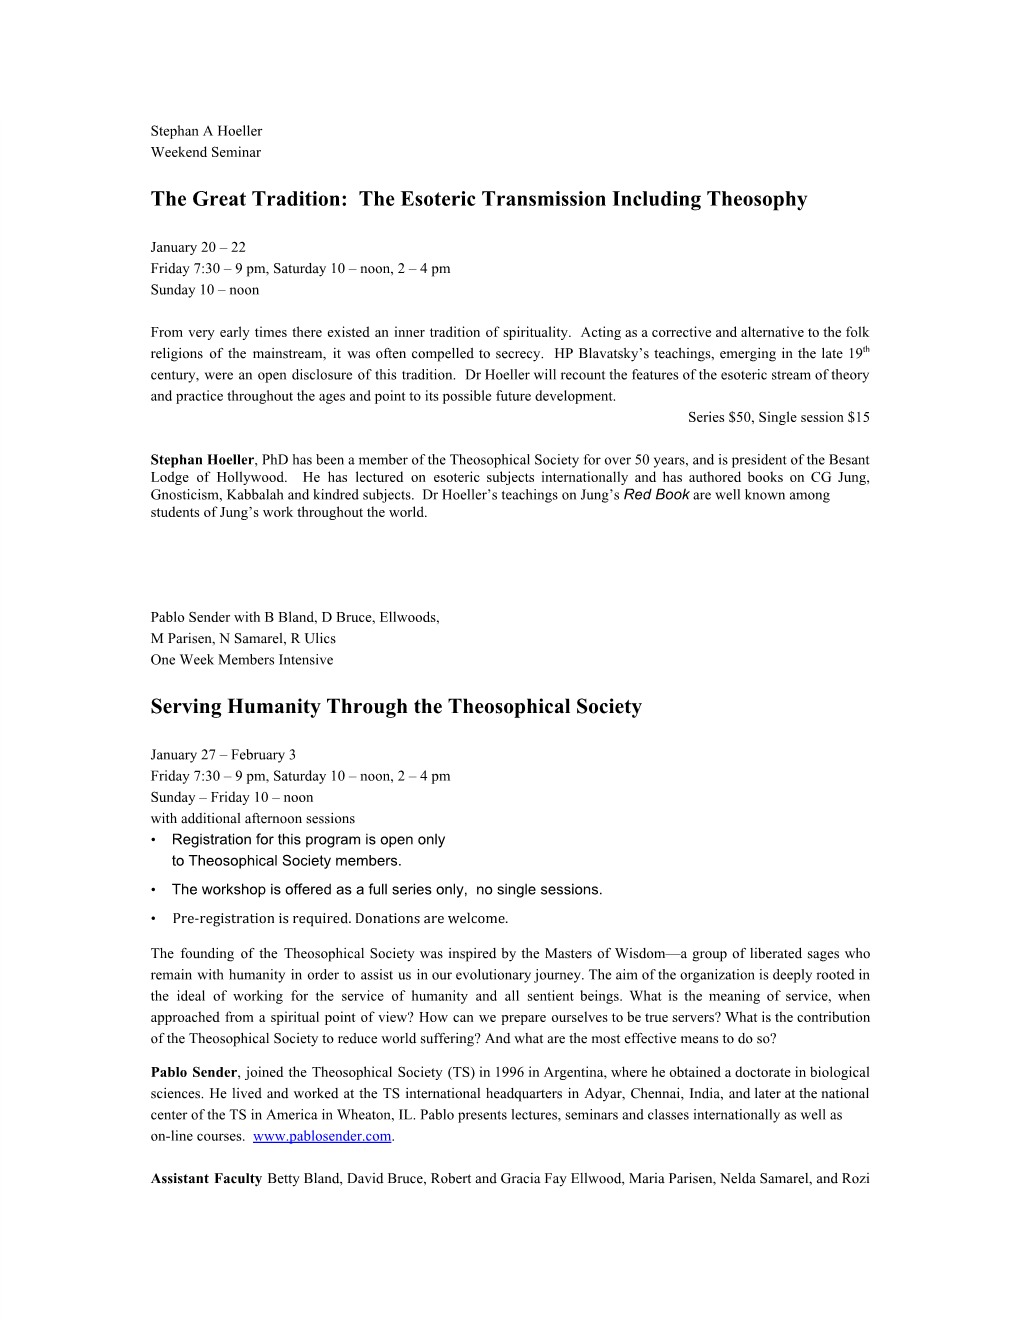 The Esoteric Transmission Including Theosophy Serving Humanity